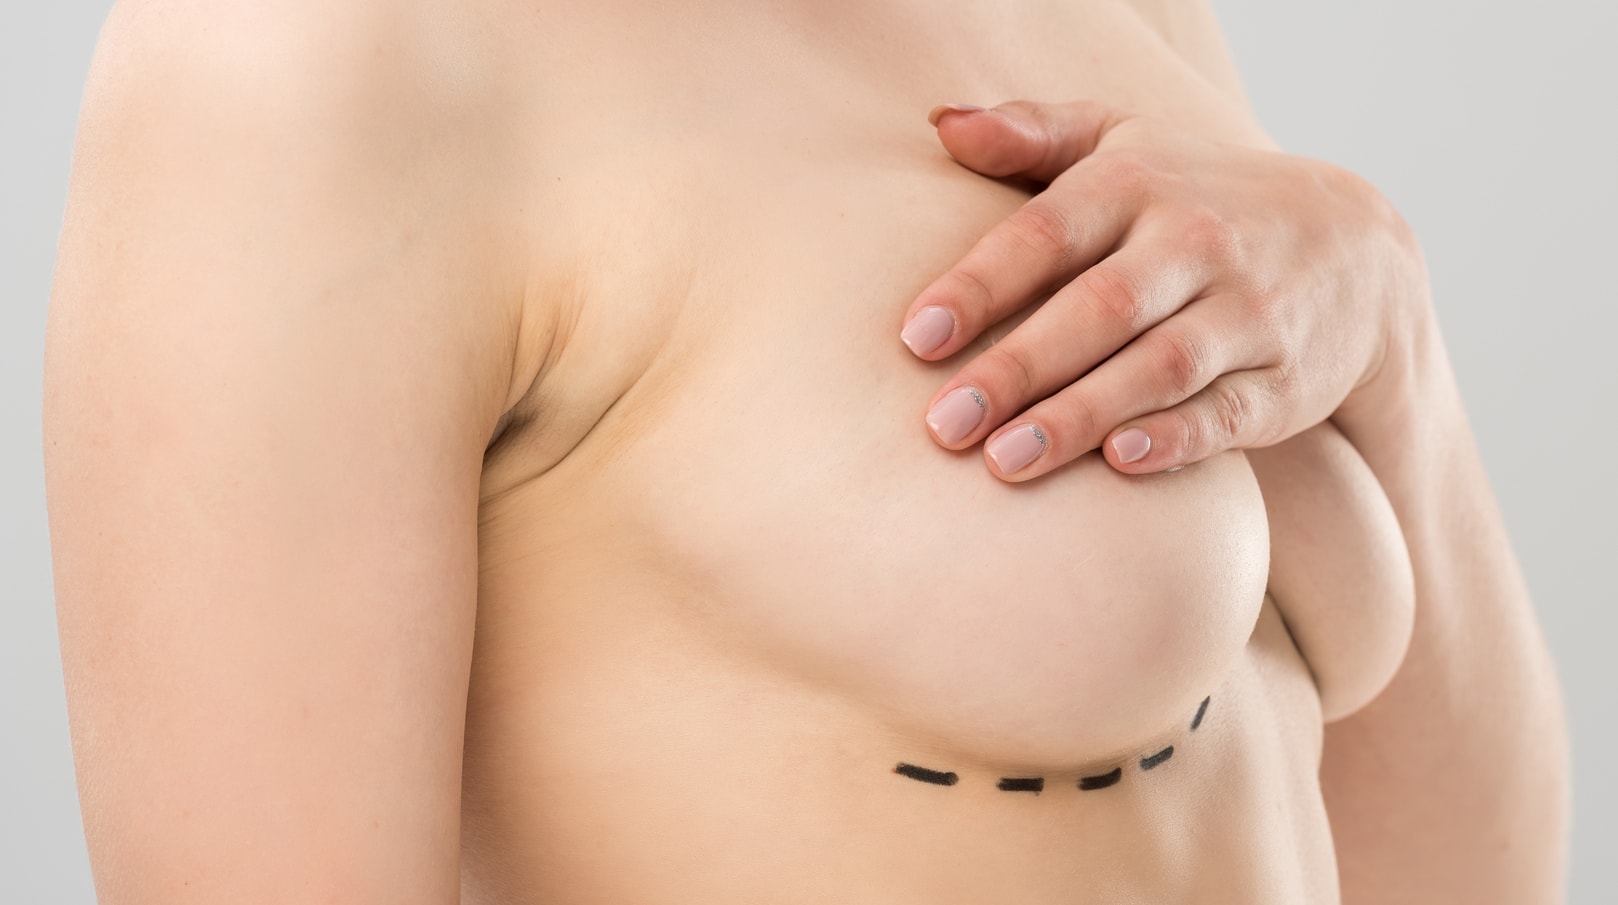 Types of Breast Lifts